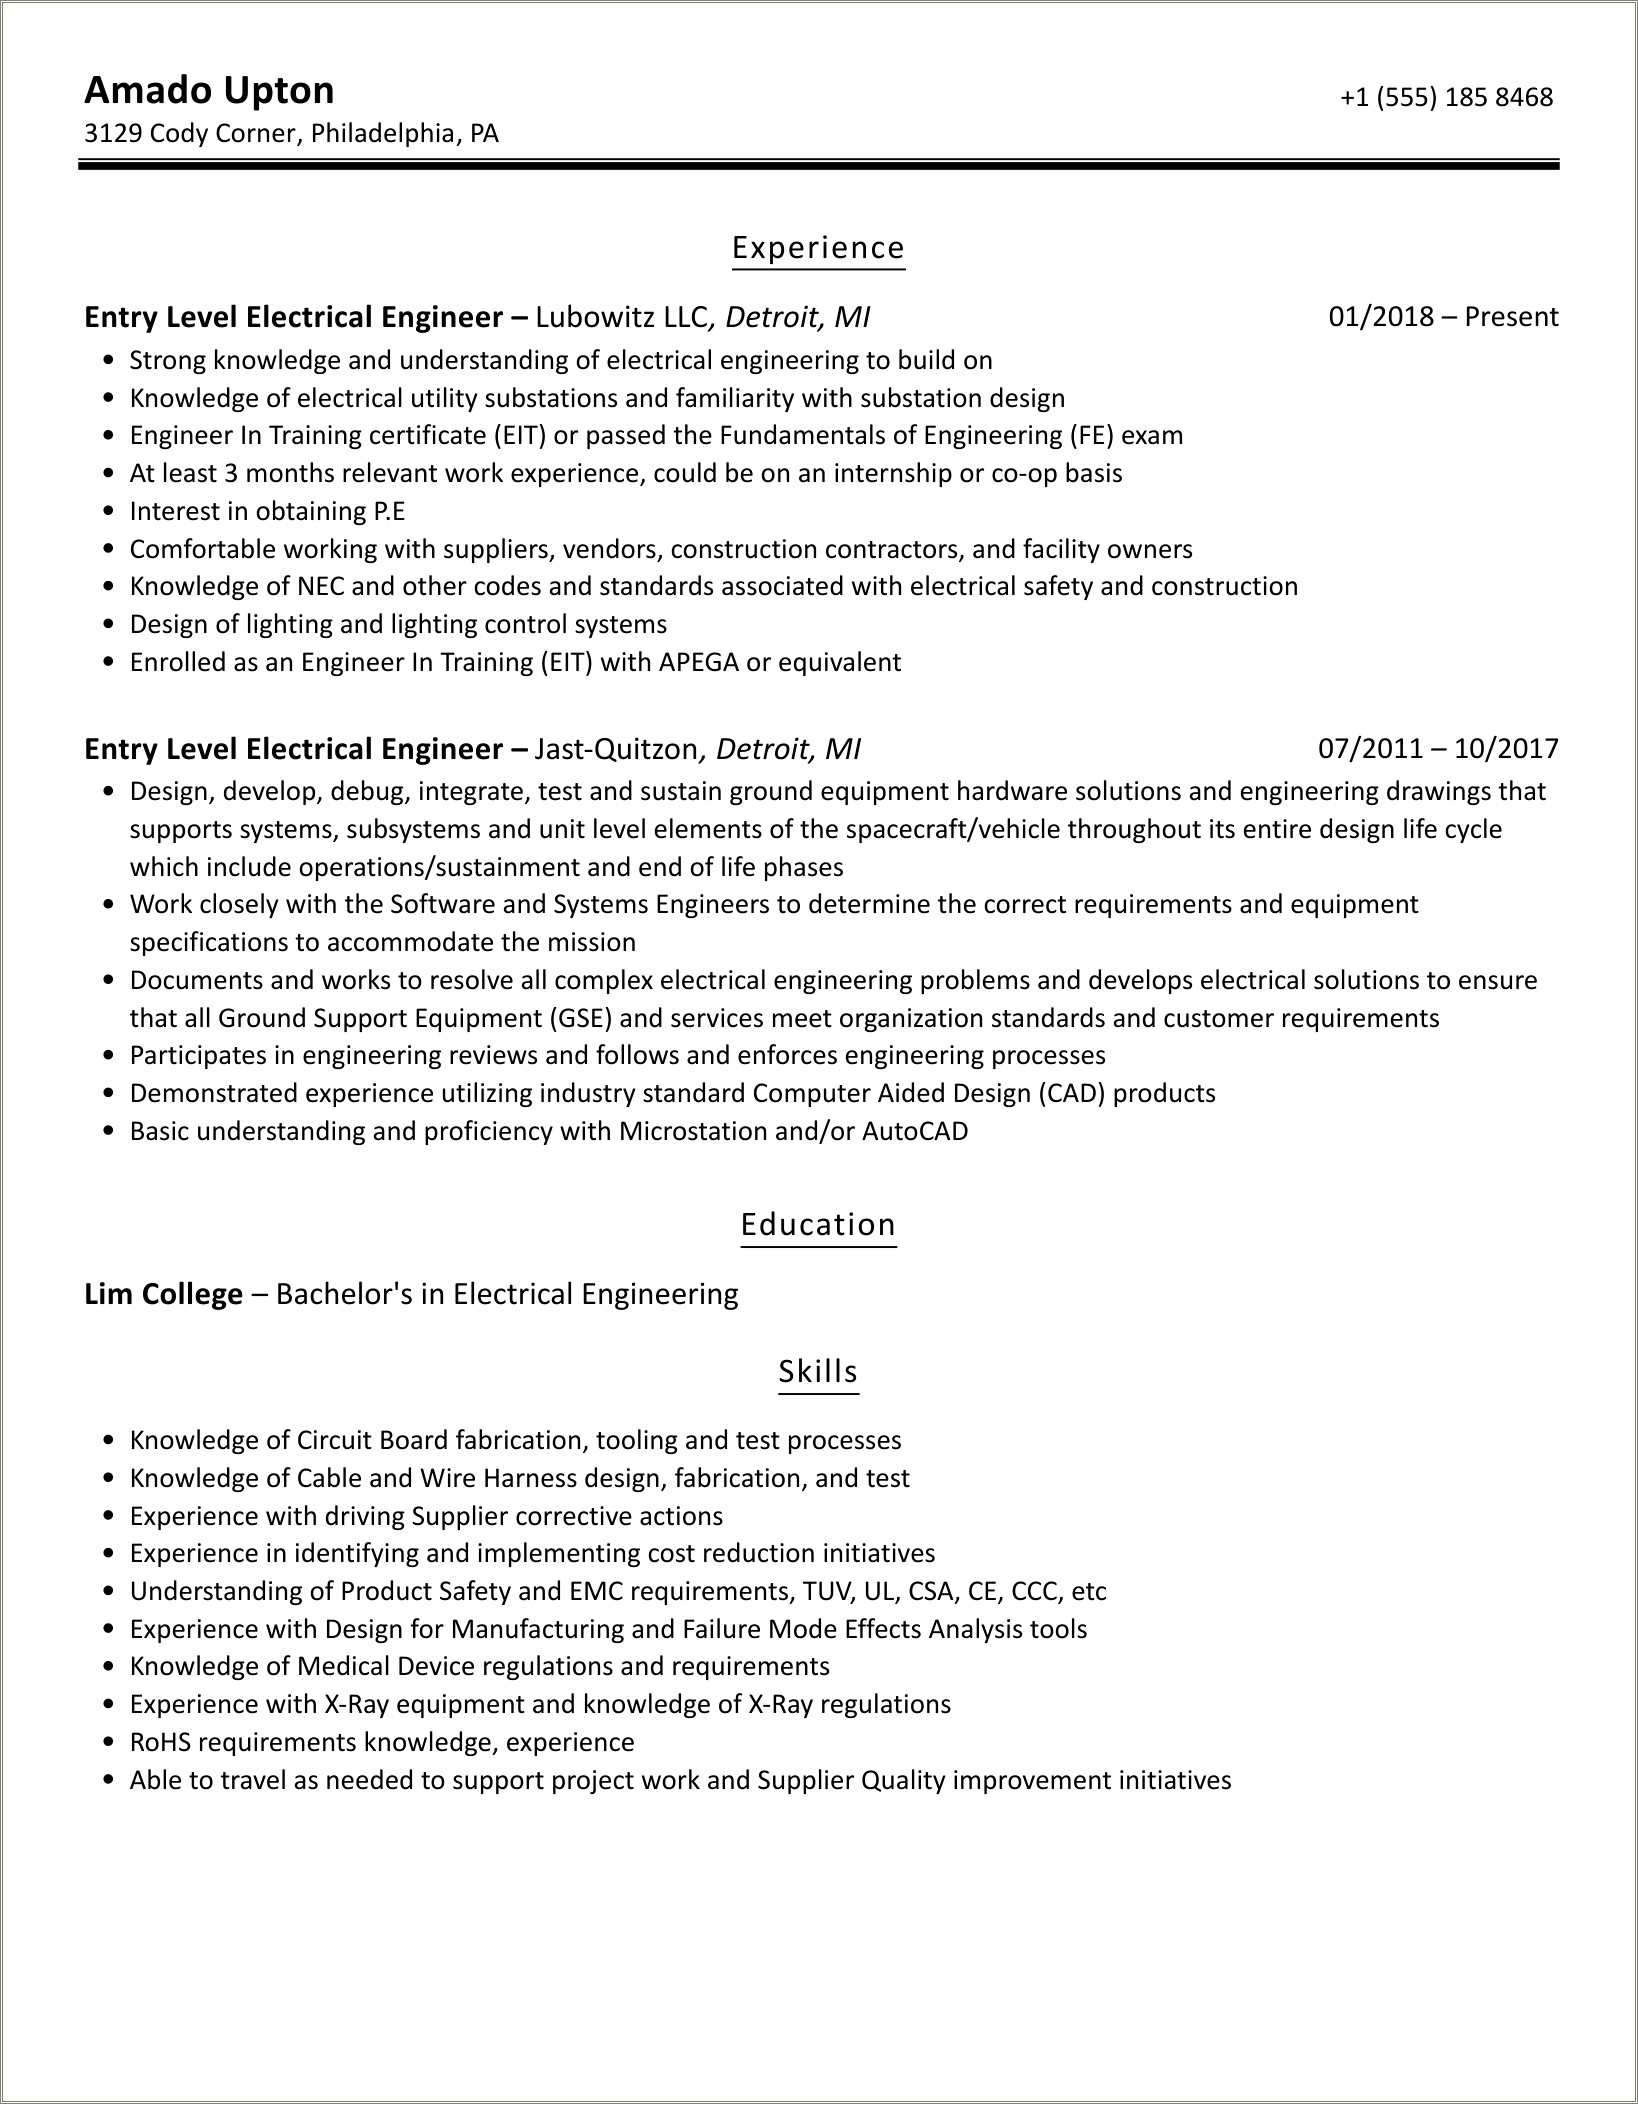 Resume Sample For Entry Level Electrical Engineer